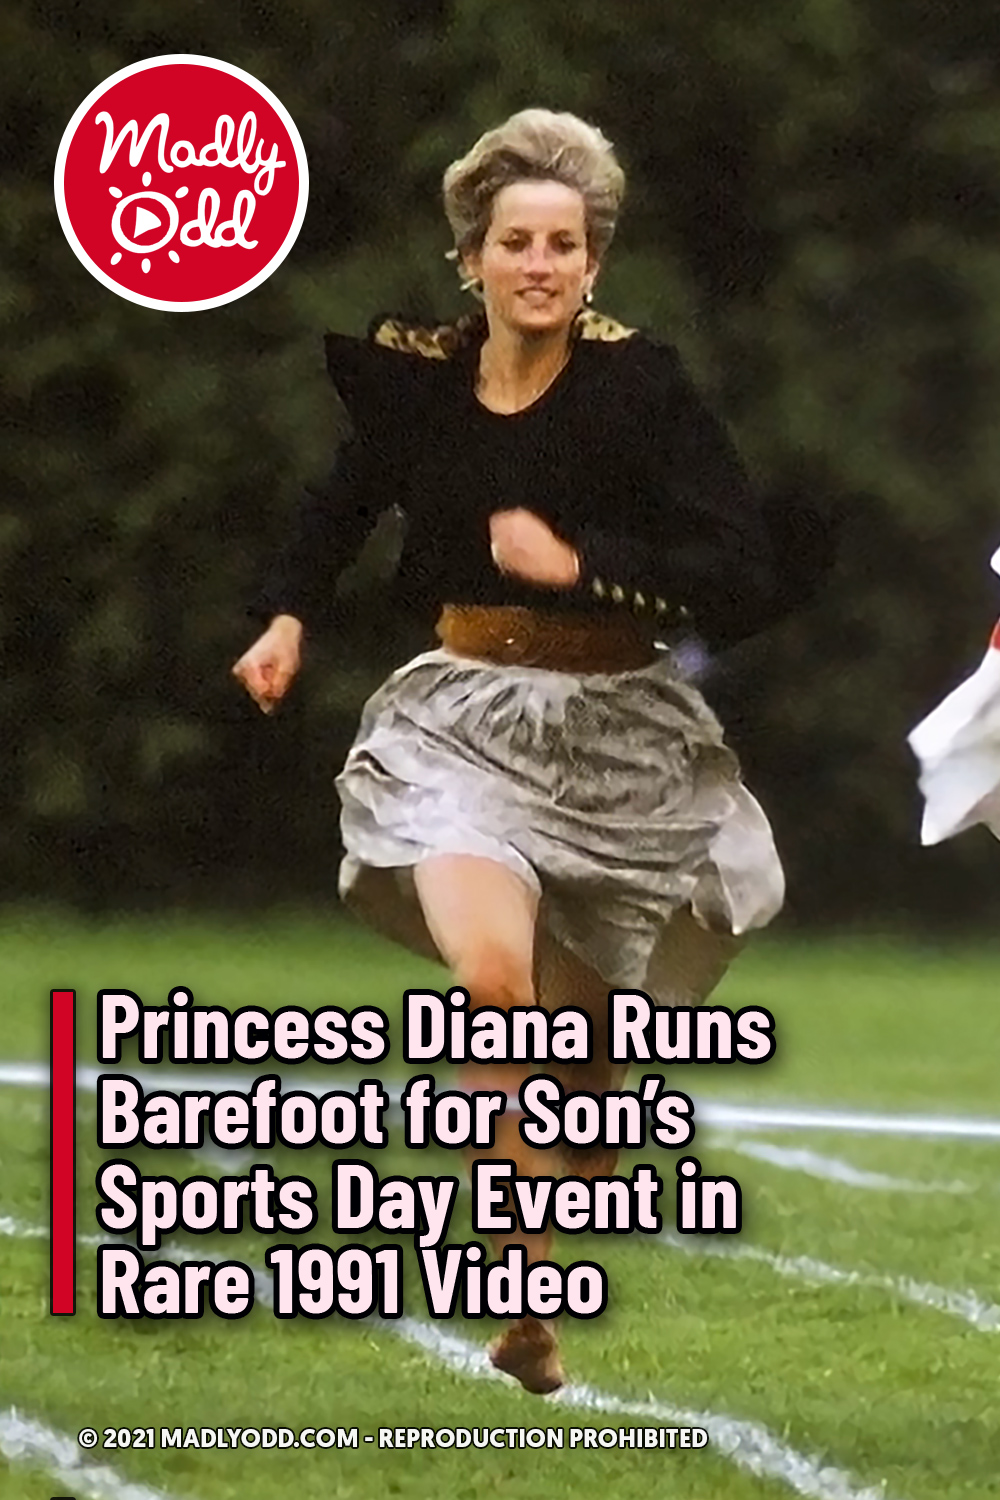 Princess Diana Runs Barefoot for Son’s Sports Day Event in Rare 1991 Video